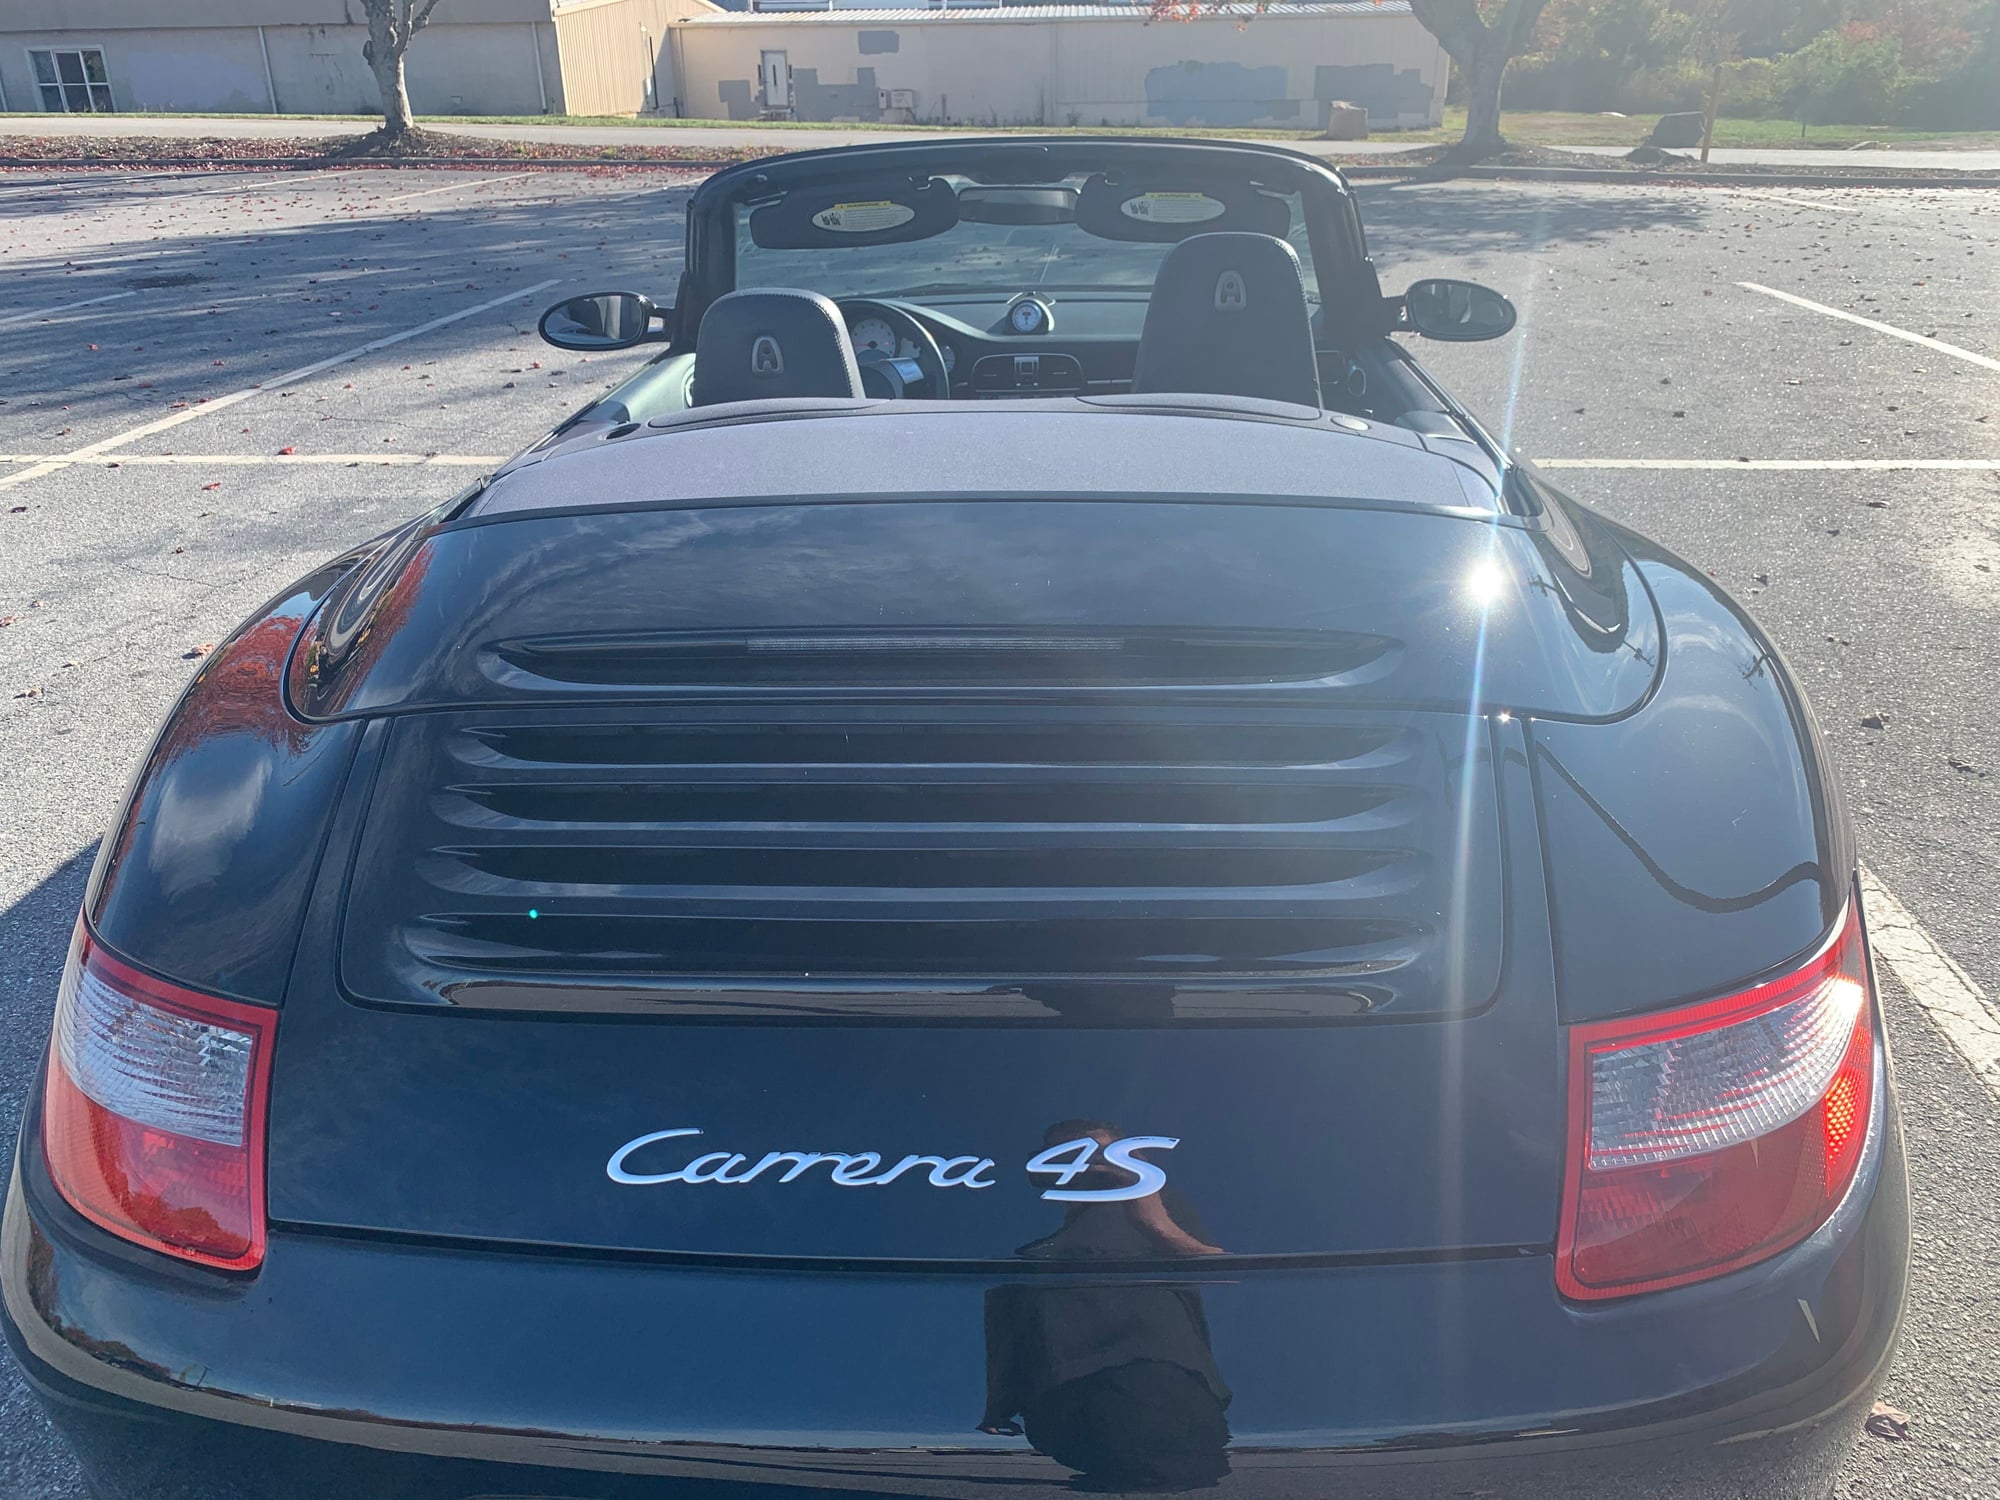 2006 Porsche 911 - 2006 Carrera 4S Cabriolet Manual 4.0 - Used - VIN WP0CB29966S766199 - 52,500 Miles - 6 cyl - AWD - Manual - Convertible - Black - Asheville, NC 28759, United States